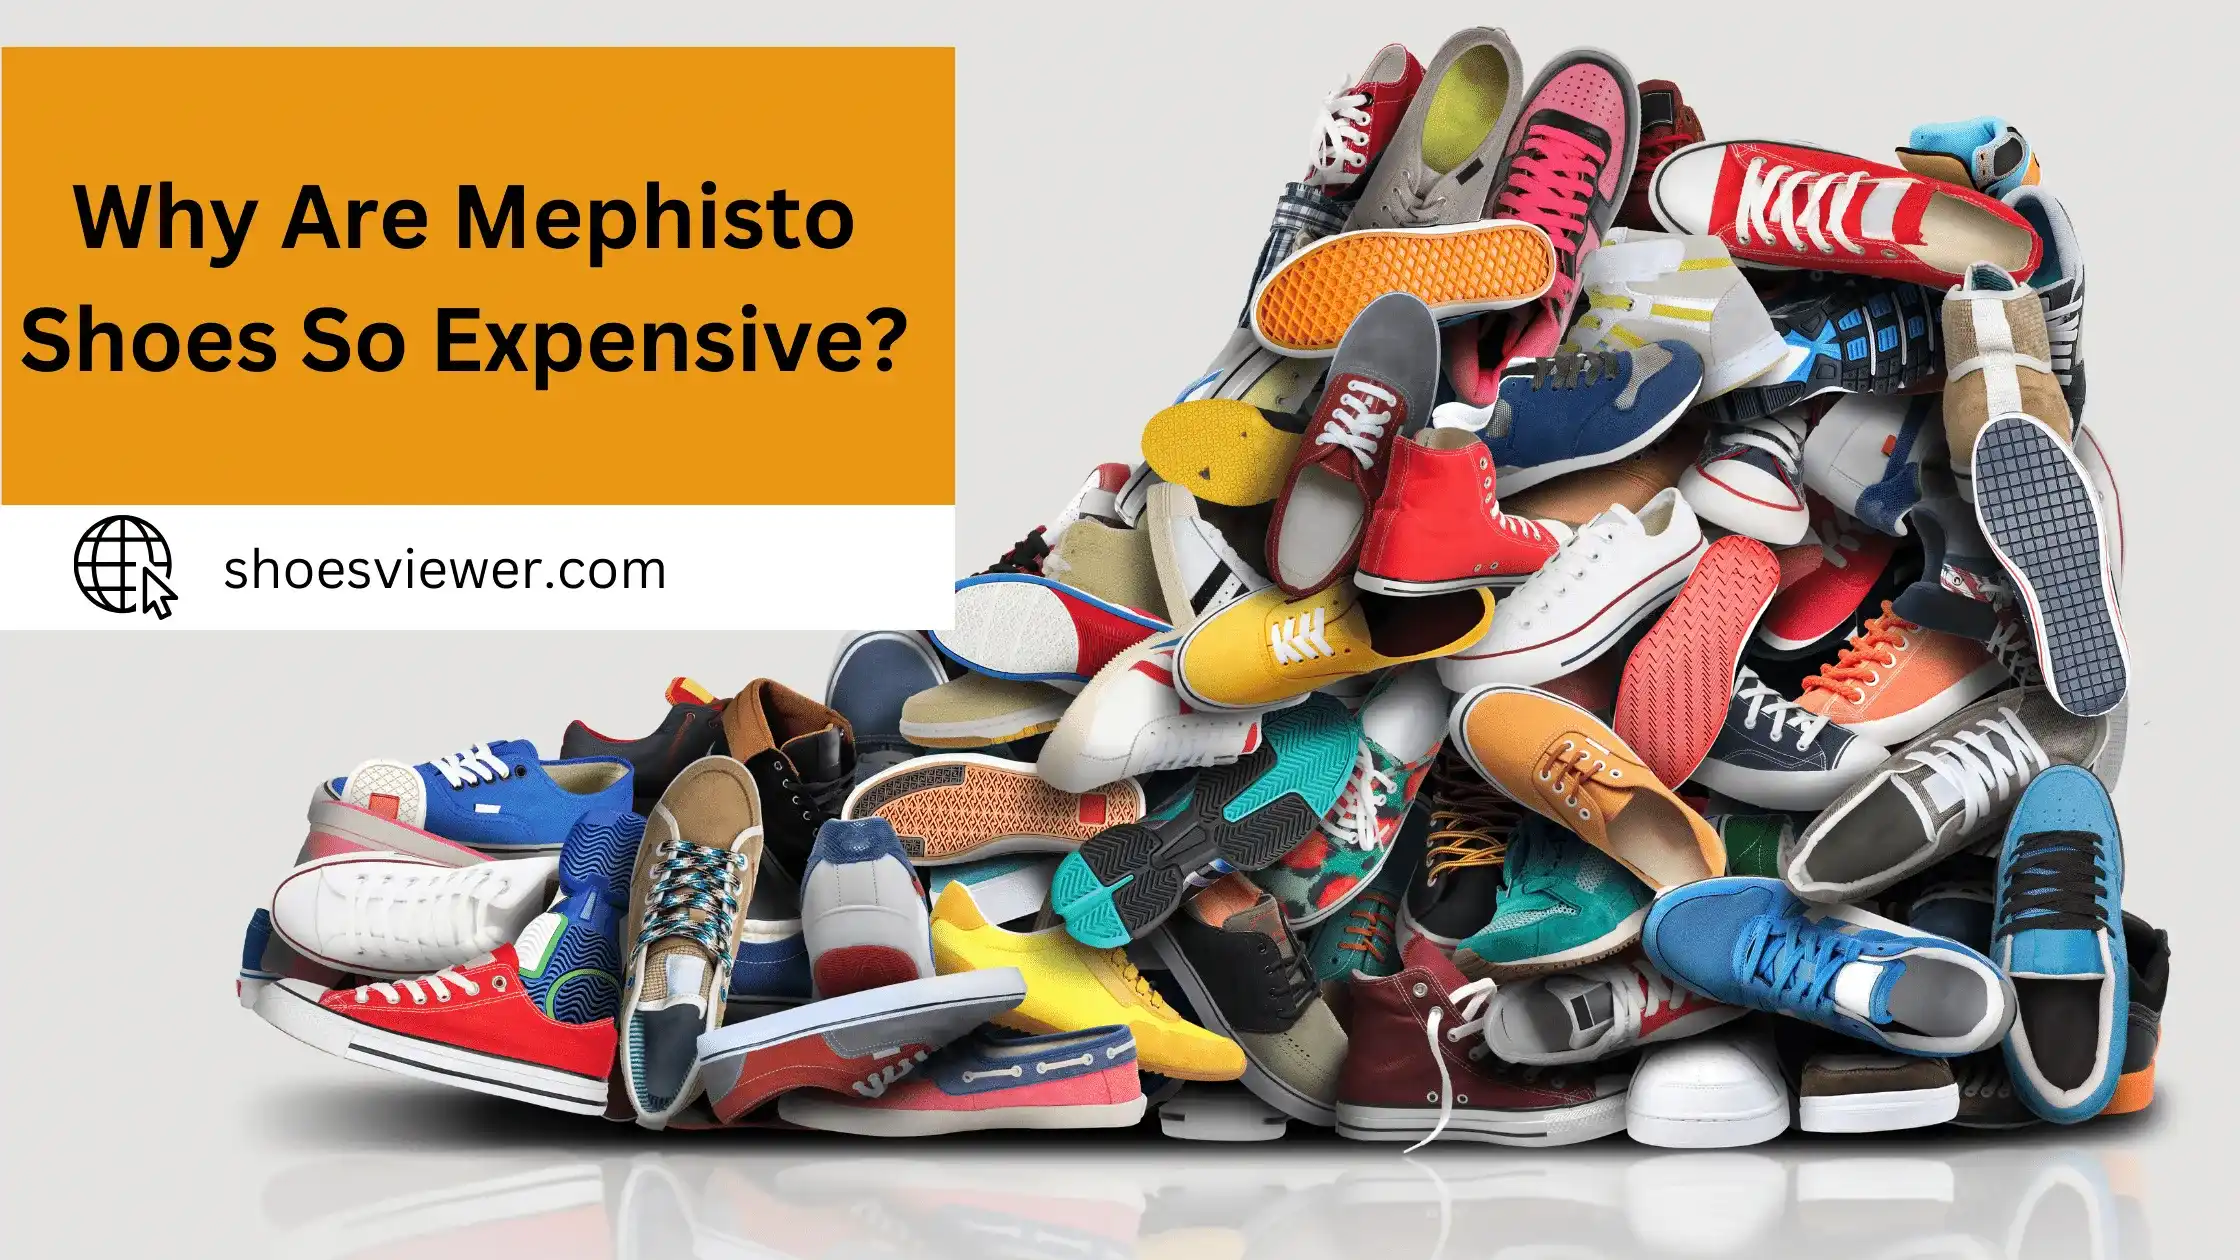 Why Are Mephisto Shoes So Expensive? Best Explained